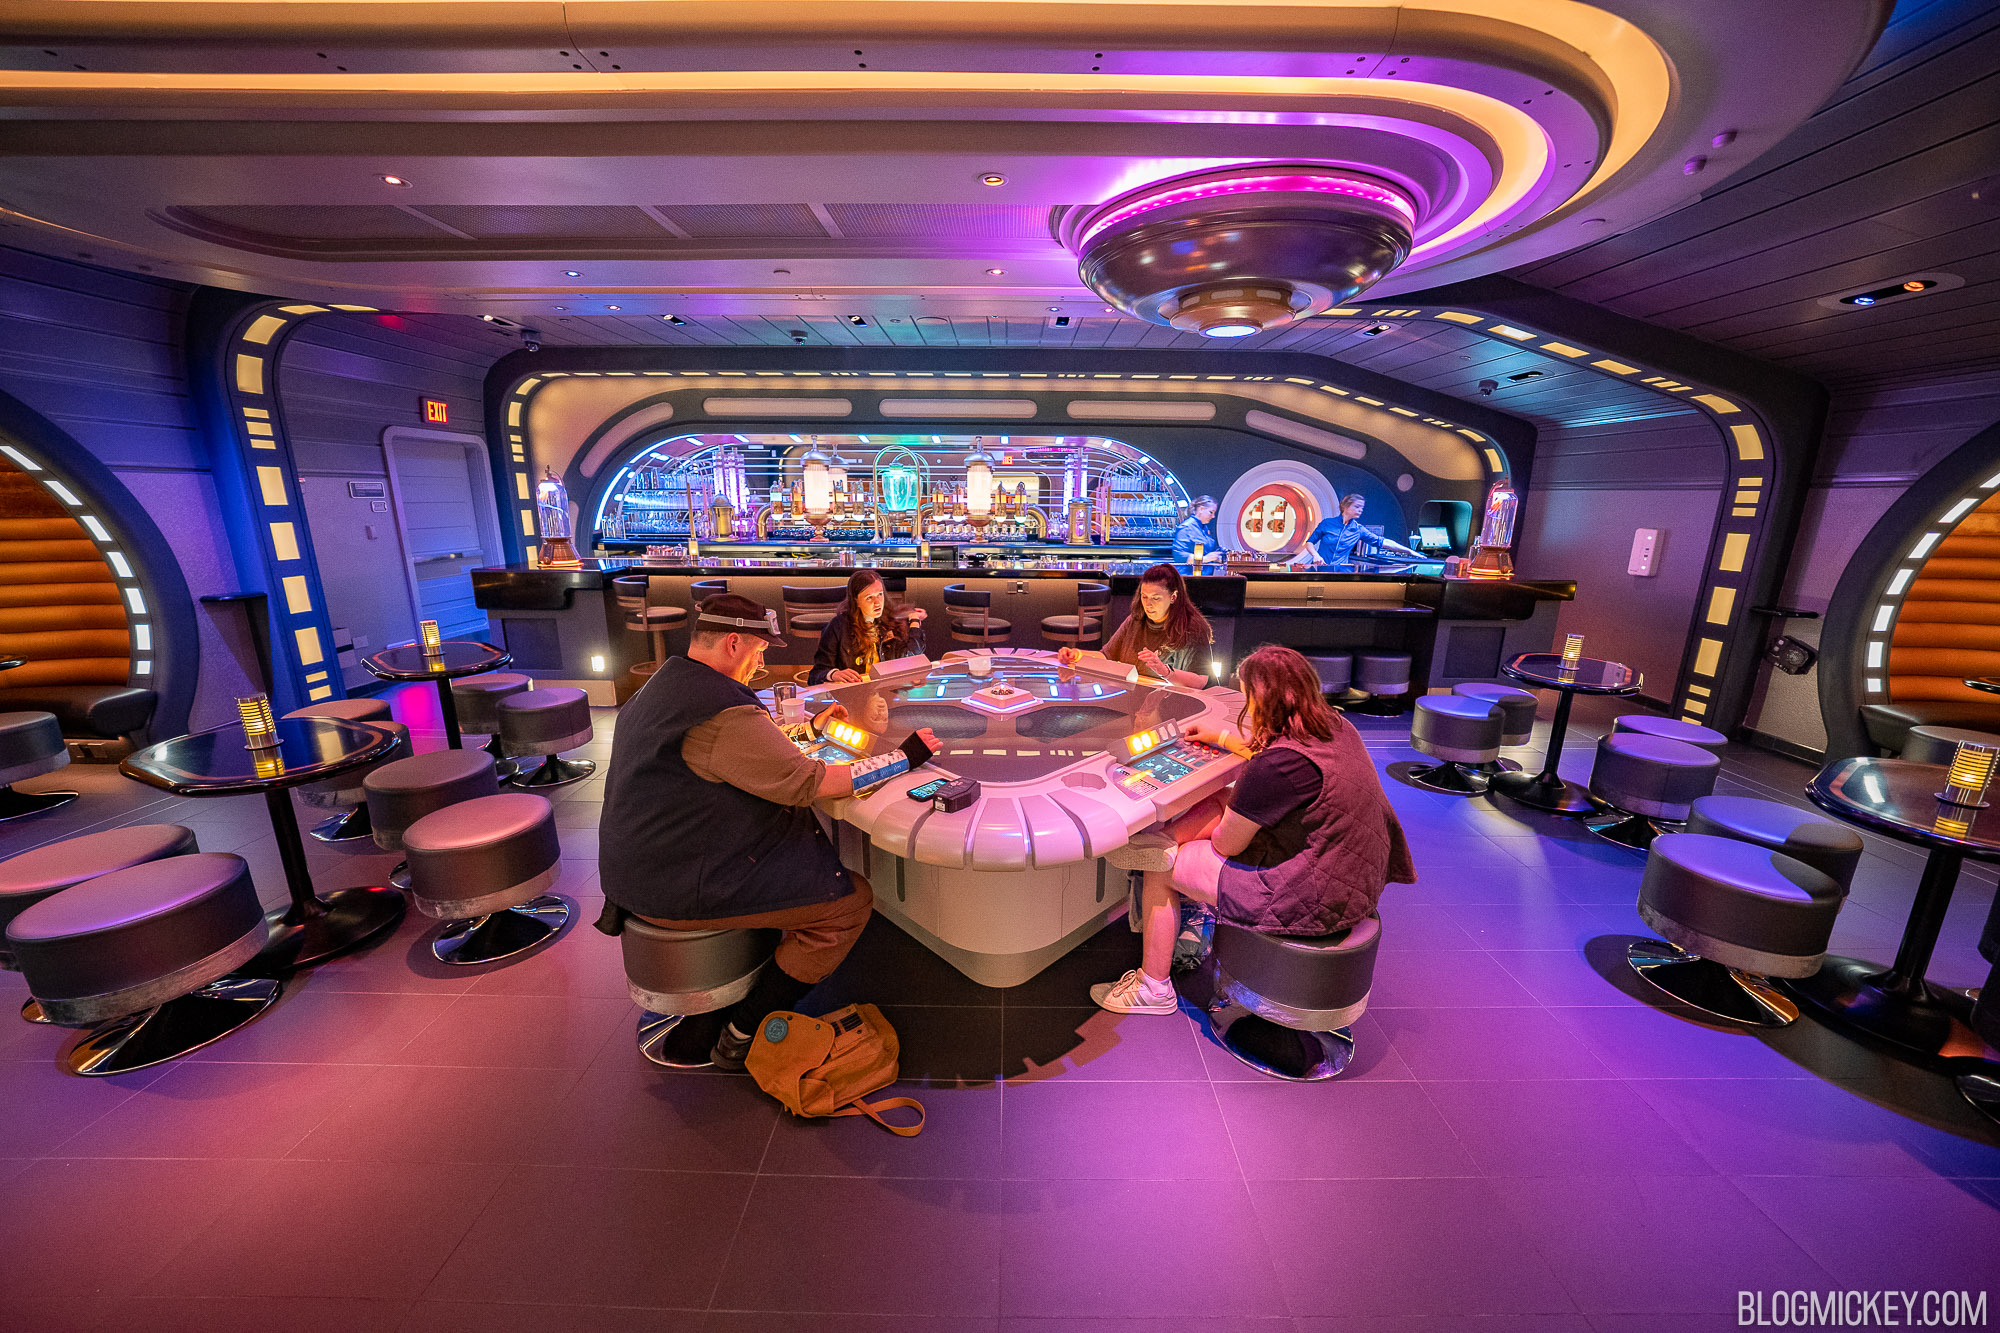 UPDATED: Star Wars cruise bar will offer iconic ship and location